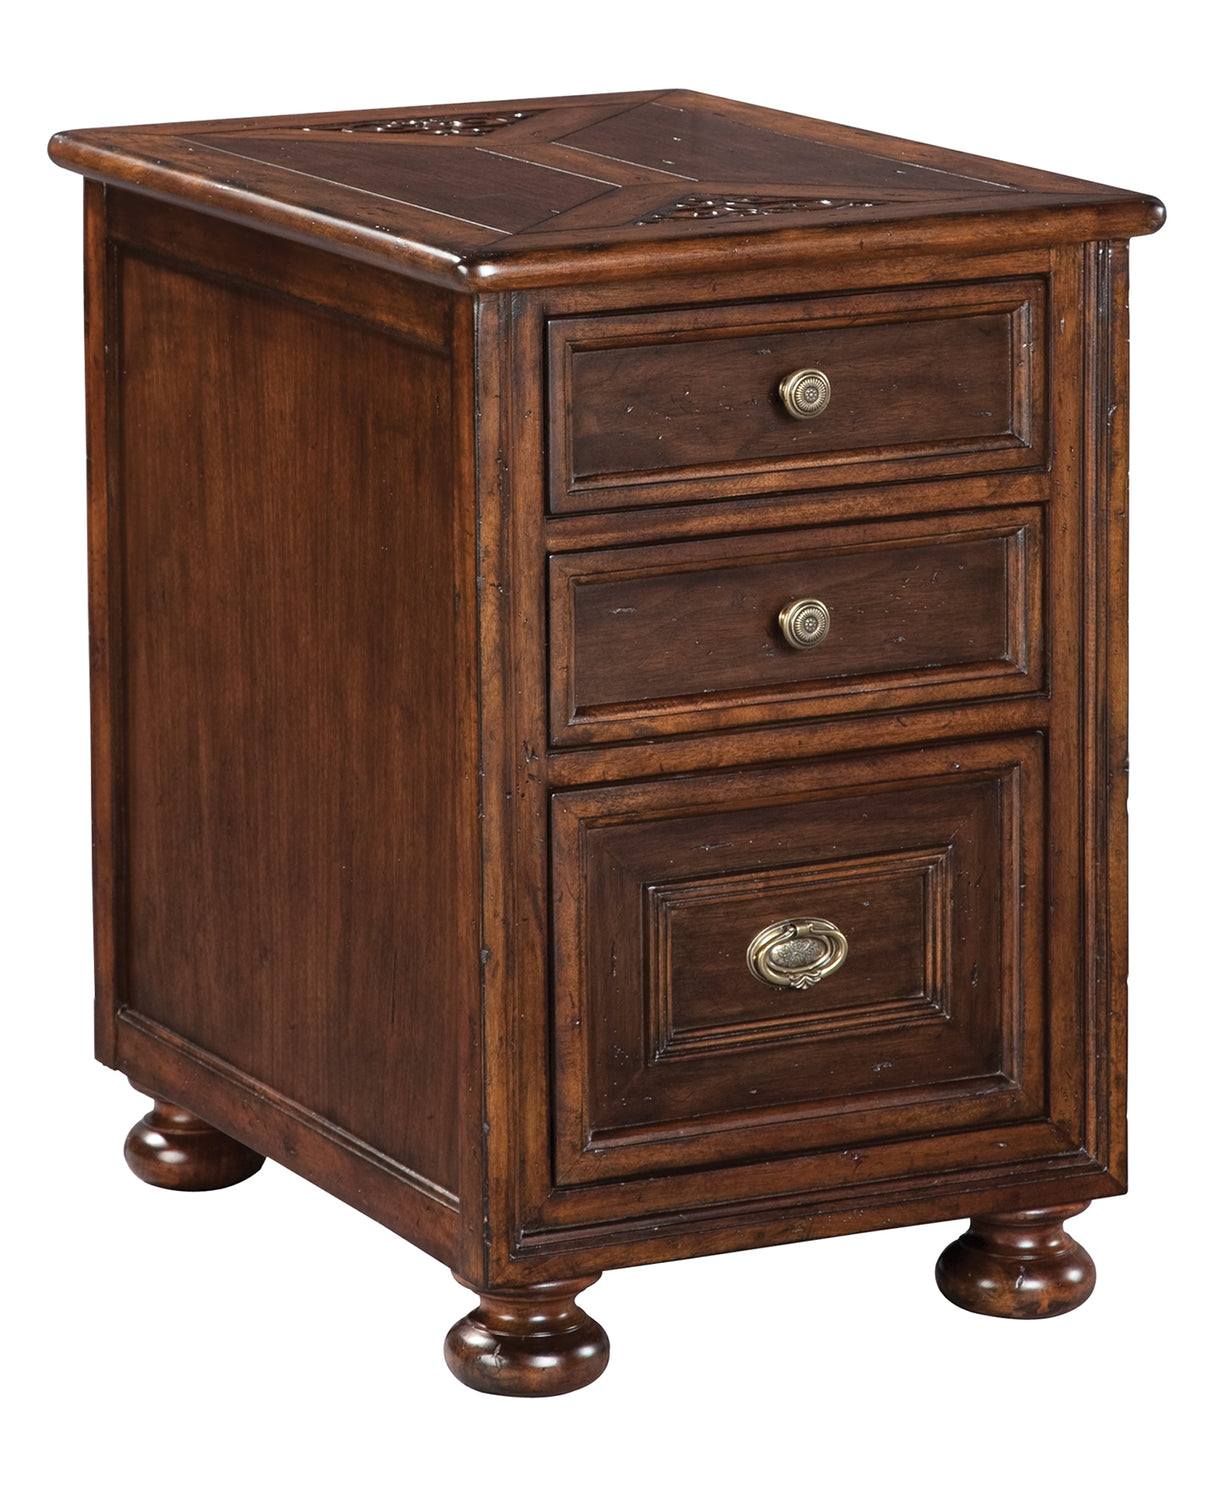 Hekman 11804 Accents 19in. x 25.25in. x 27.75in. Chairside Chest